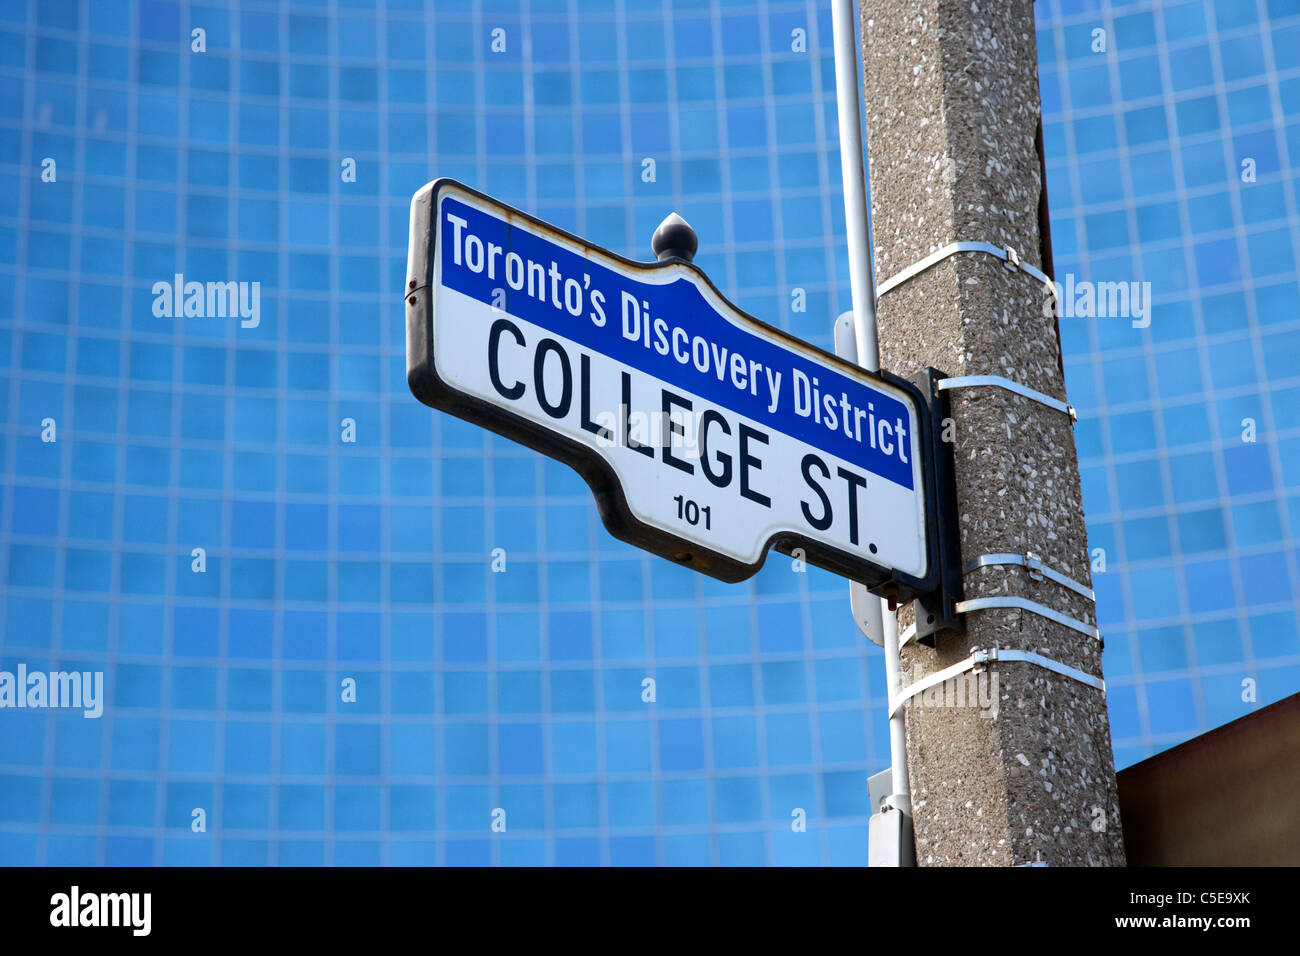 toronto's discovery district college street sign in front of the ontario power generation opg building toronto ontario canada Stock Photo